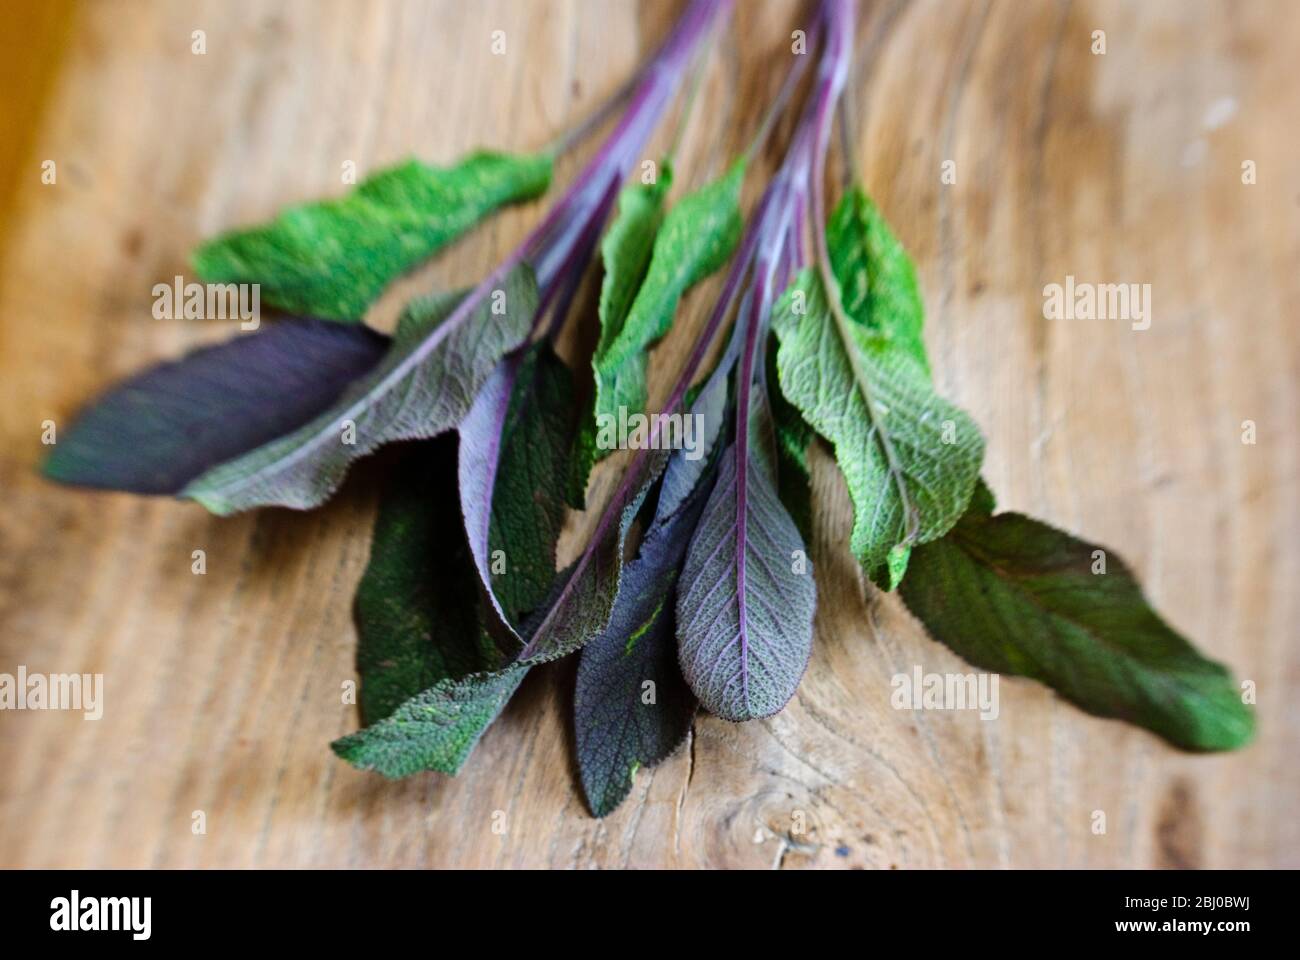 Freshly cut sprig of purple sage leaves on old wooden surface - Stock Photo